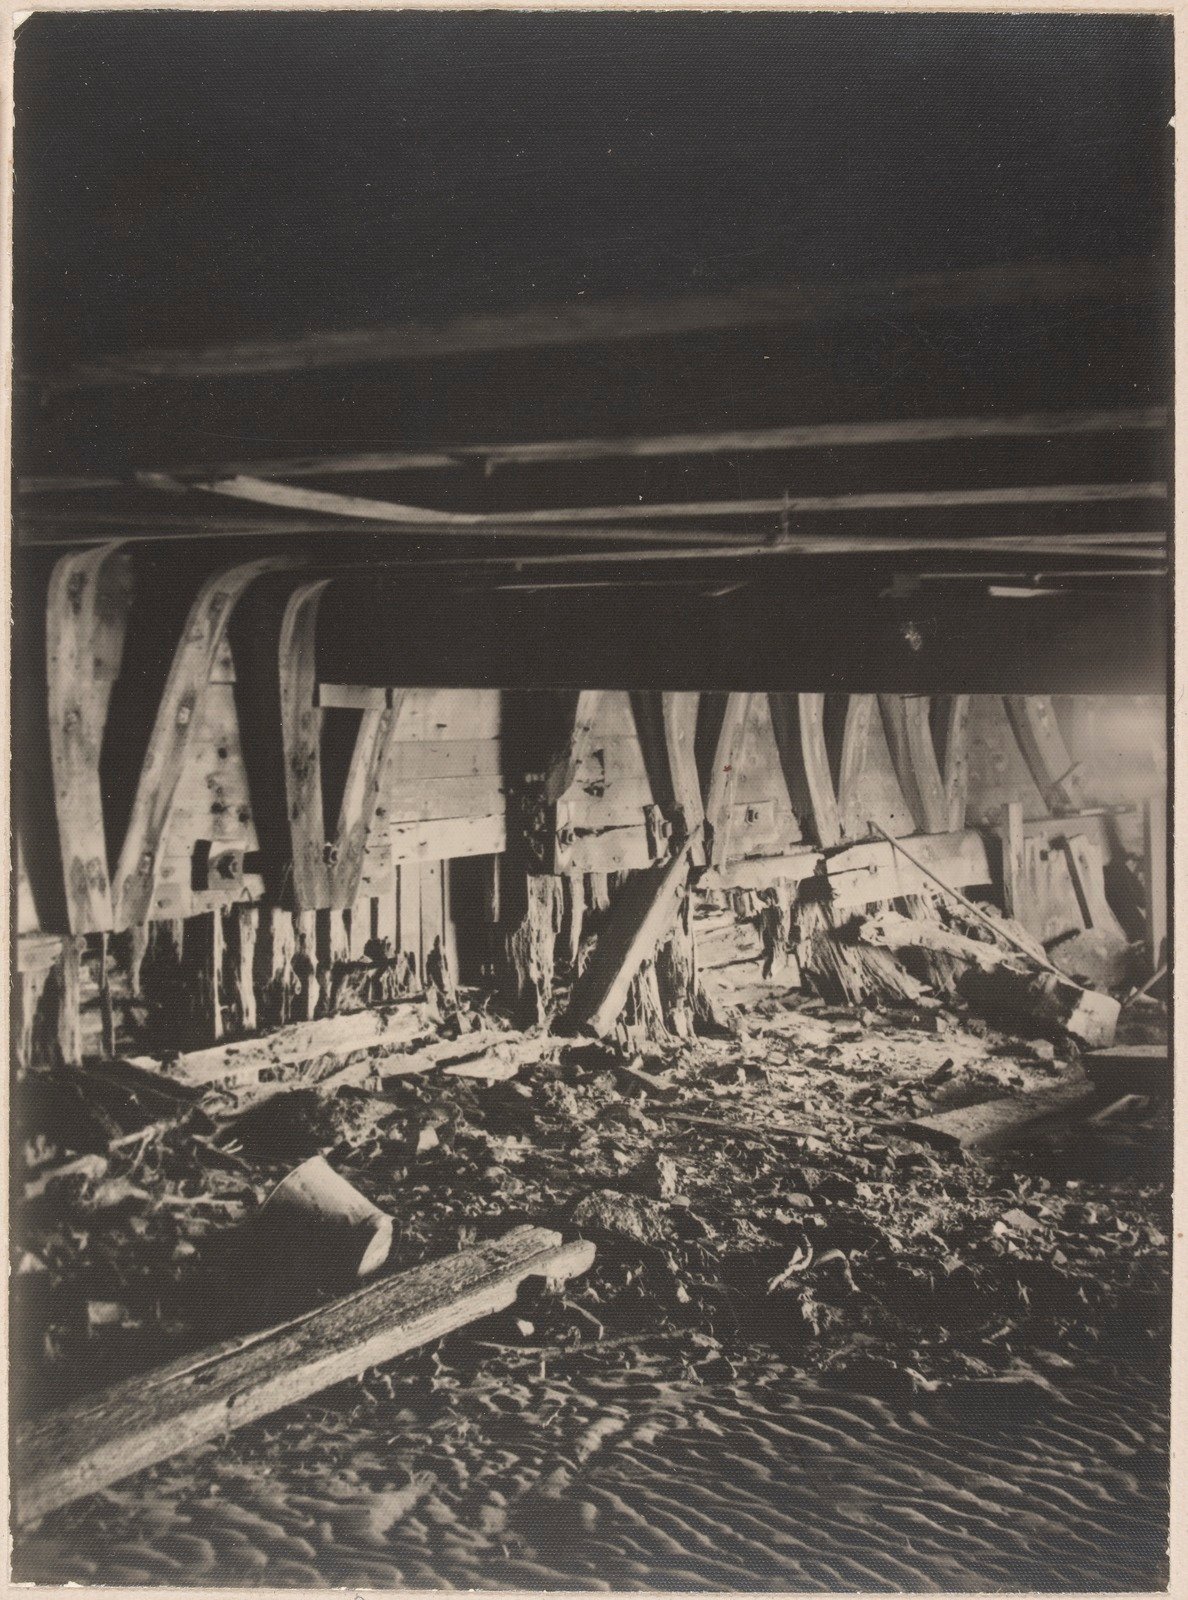 Black and white photo showing the dilapidated interior of Captain Kenney's bathing ship before it was destroyed